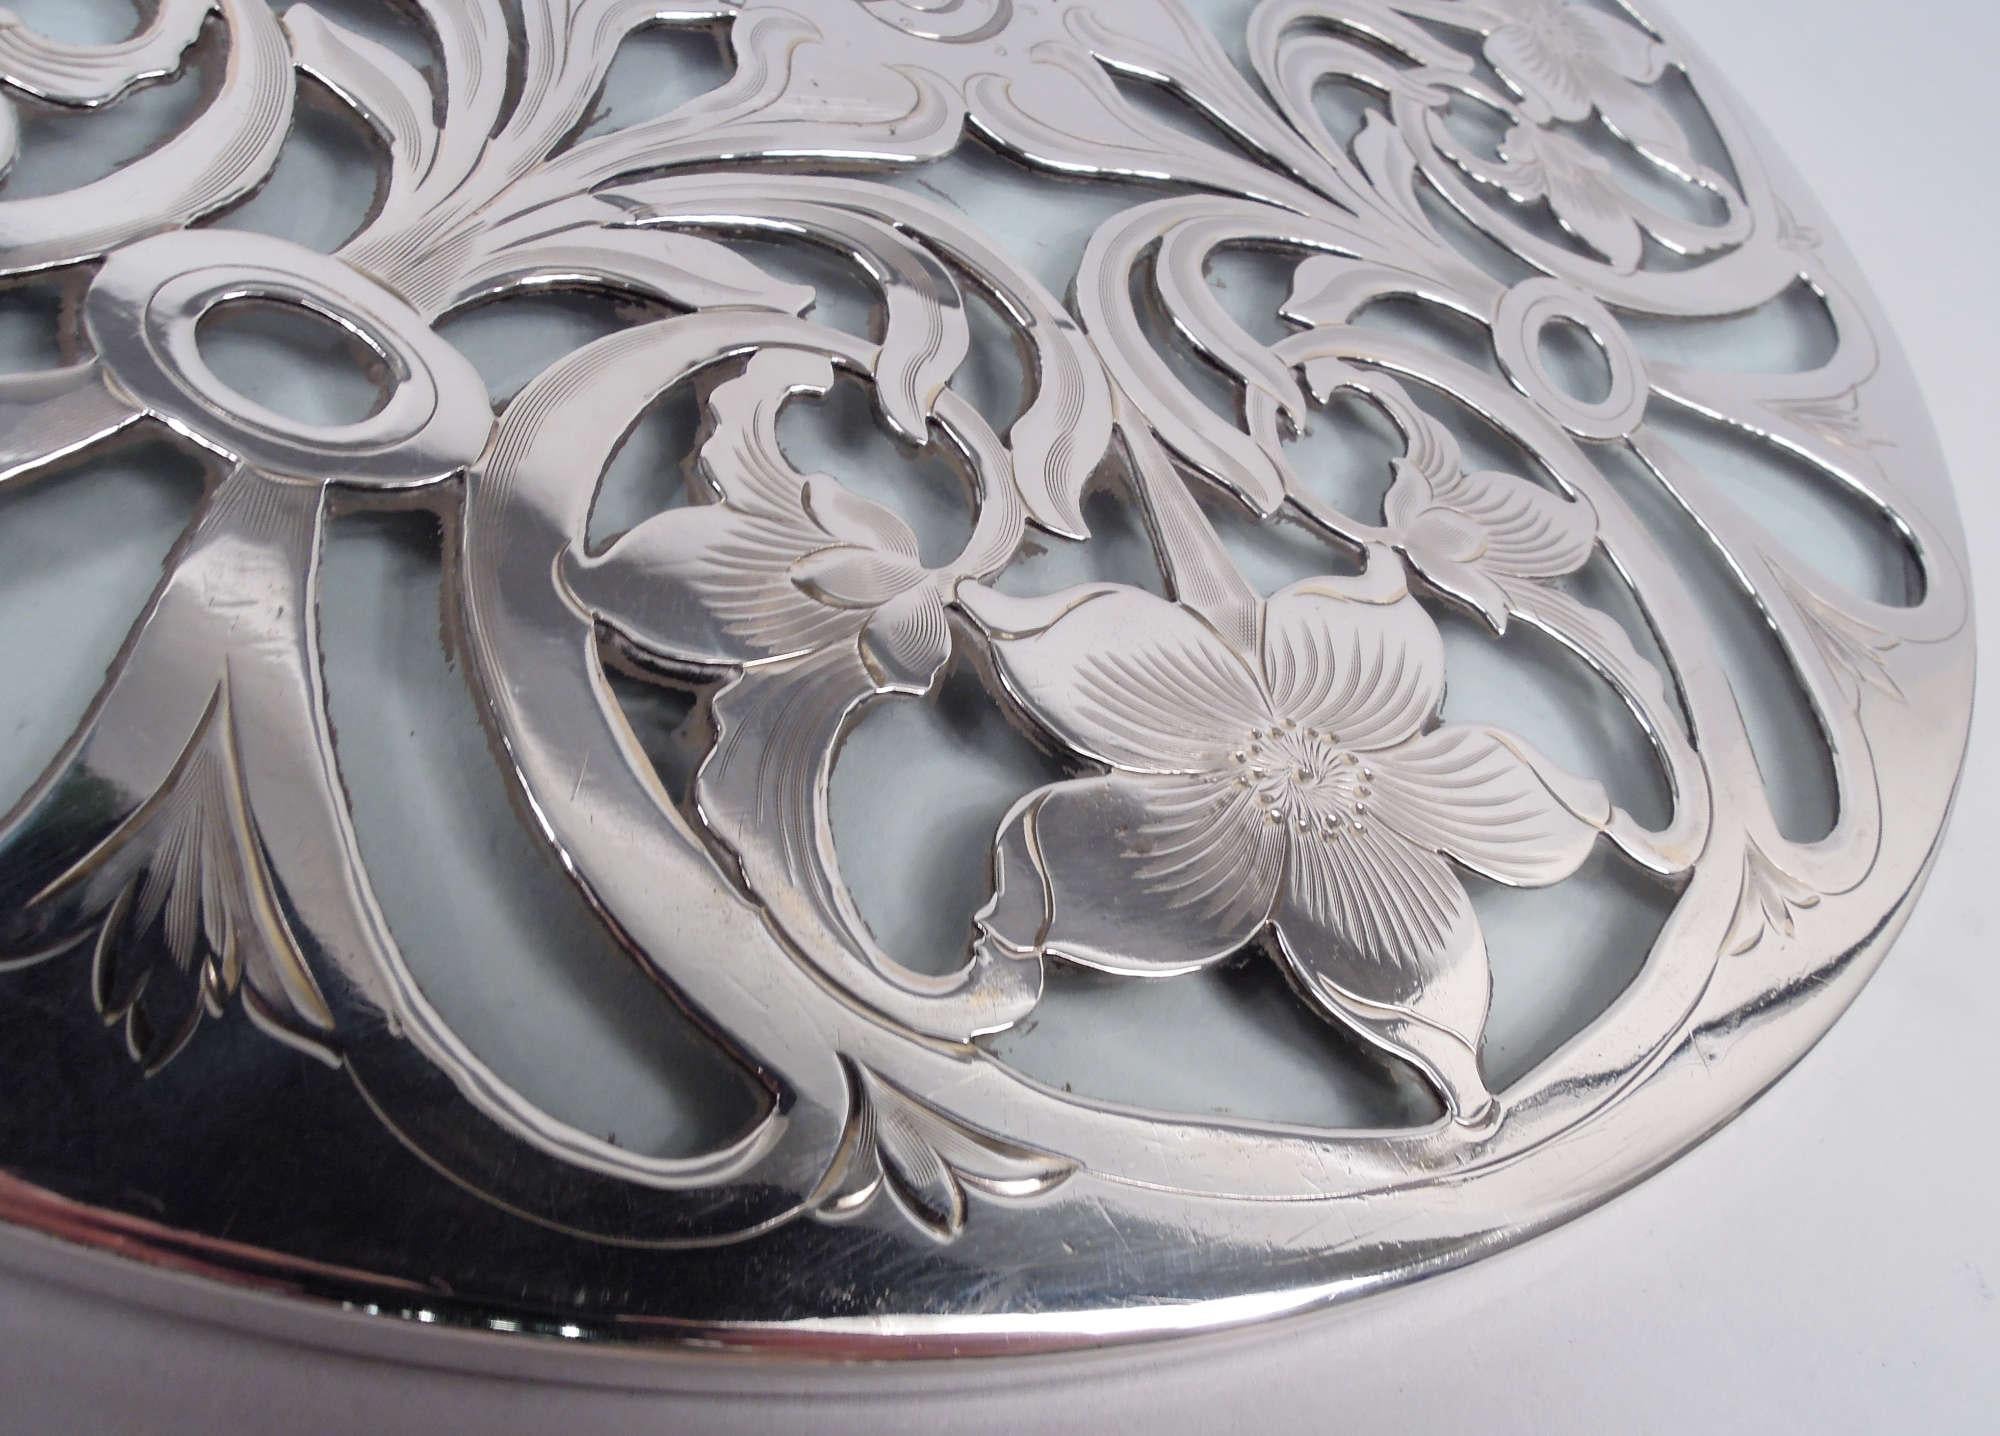 20th Century American Art Nouveau Floral Silver Overlay 10-Inch Round Trivet